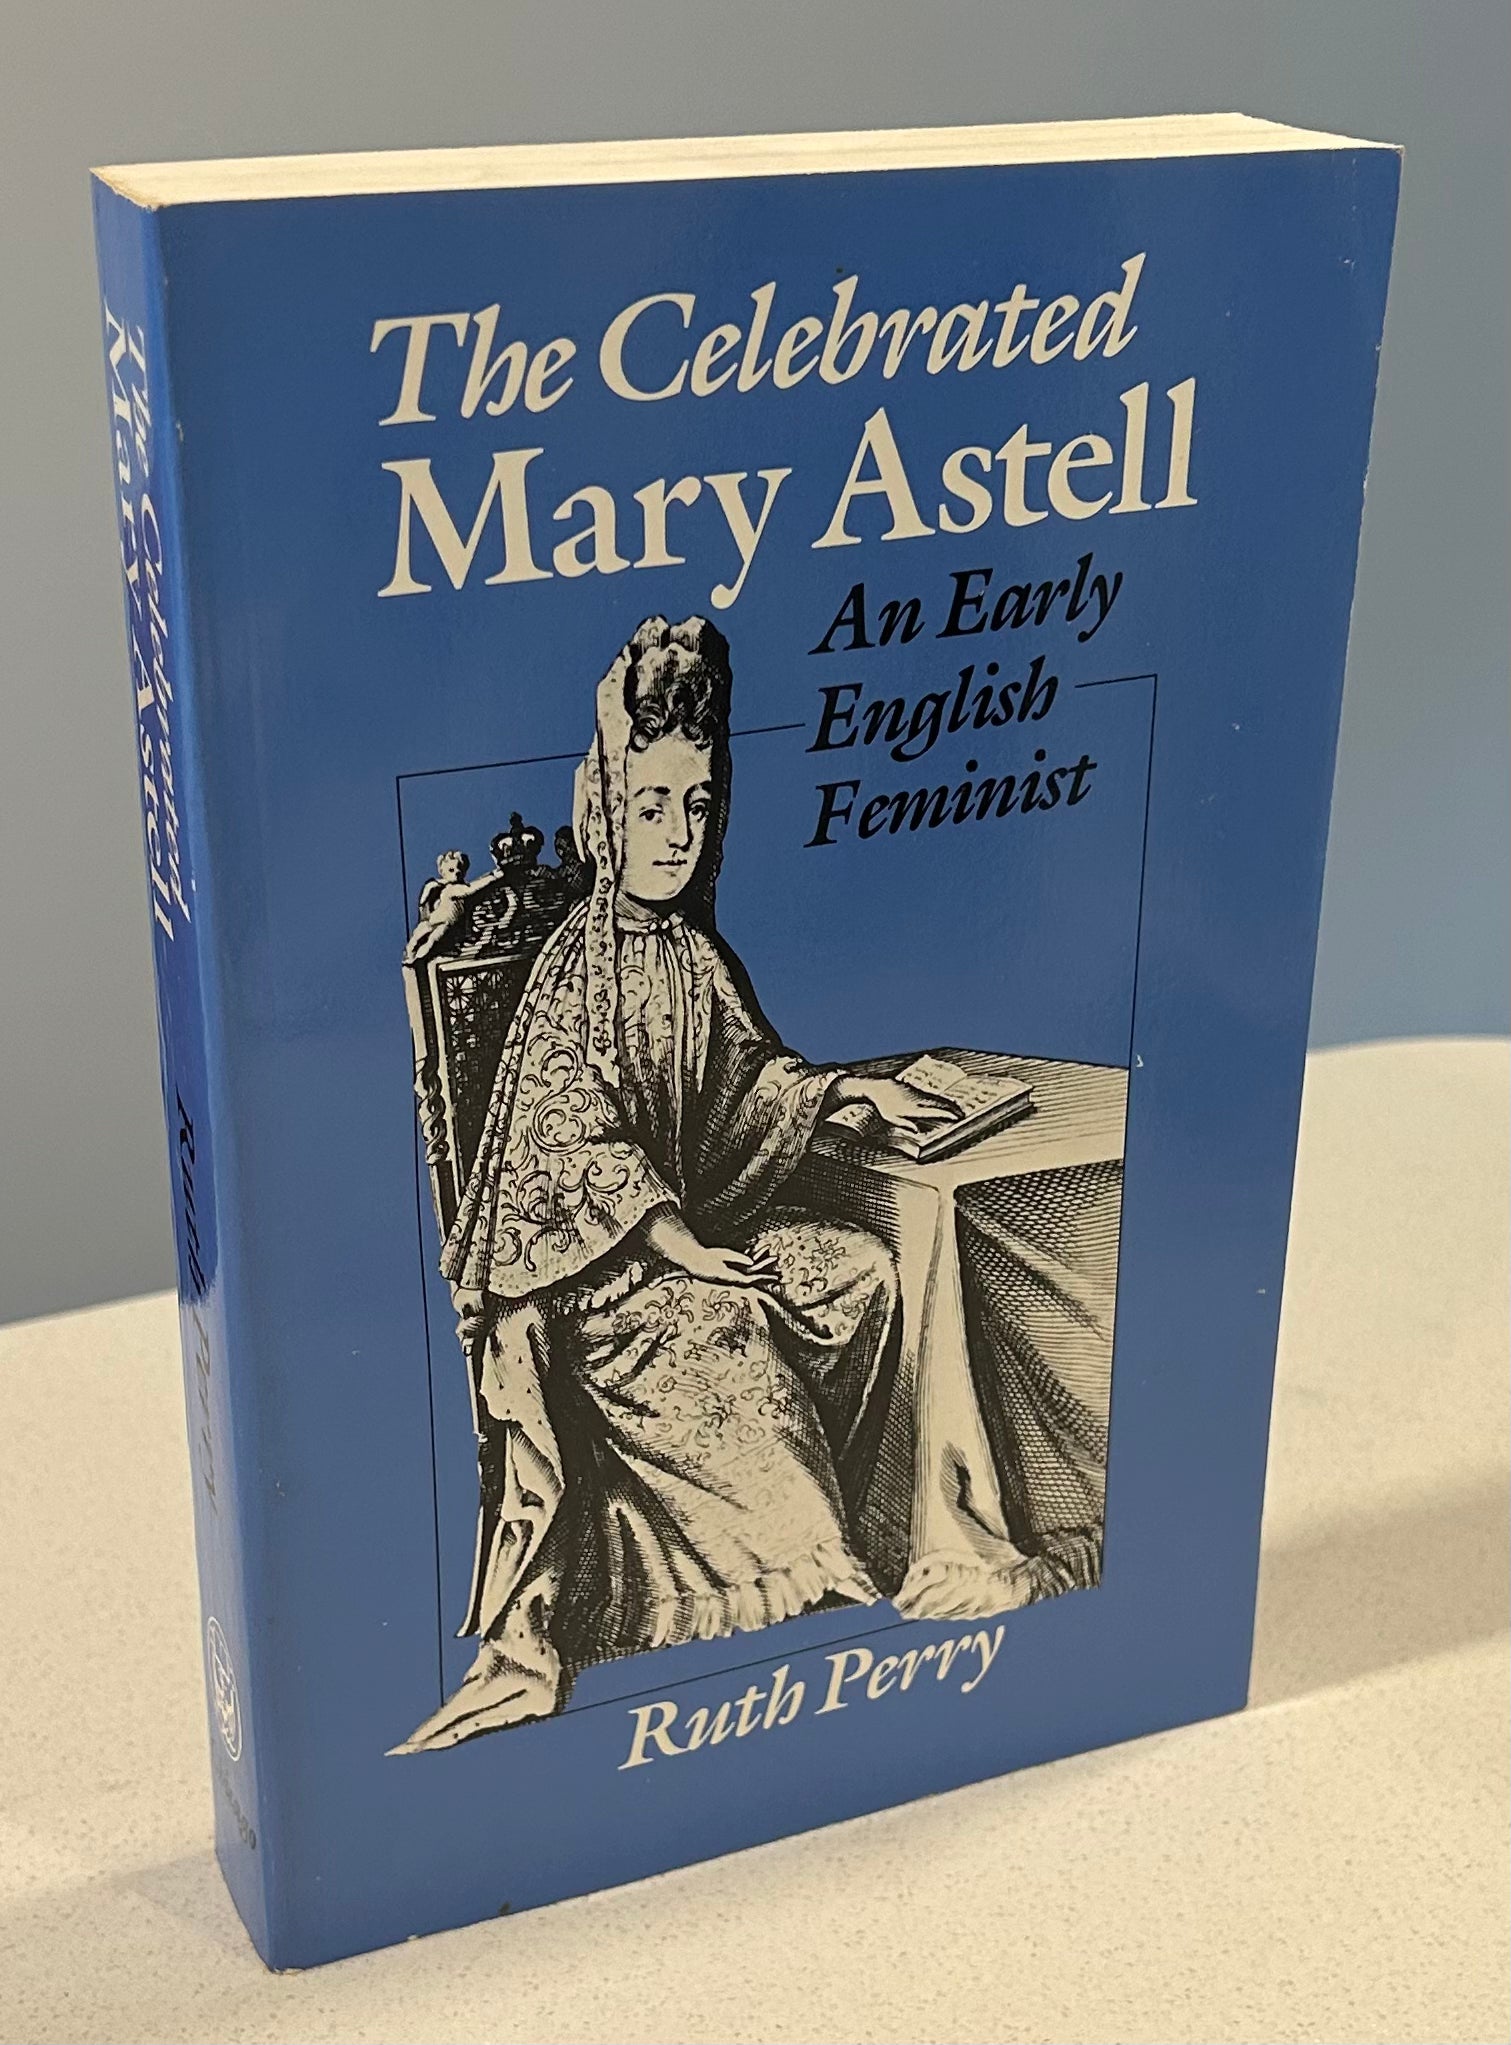 The Celebrated Mary Astell   An Early English Feminist